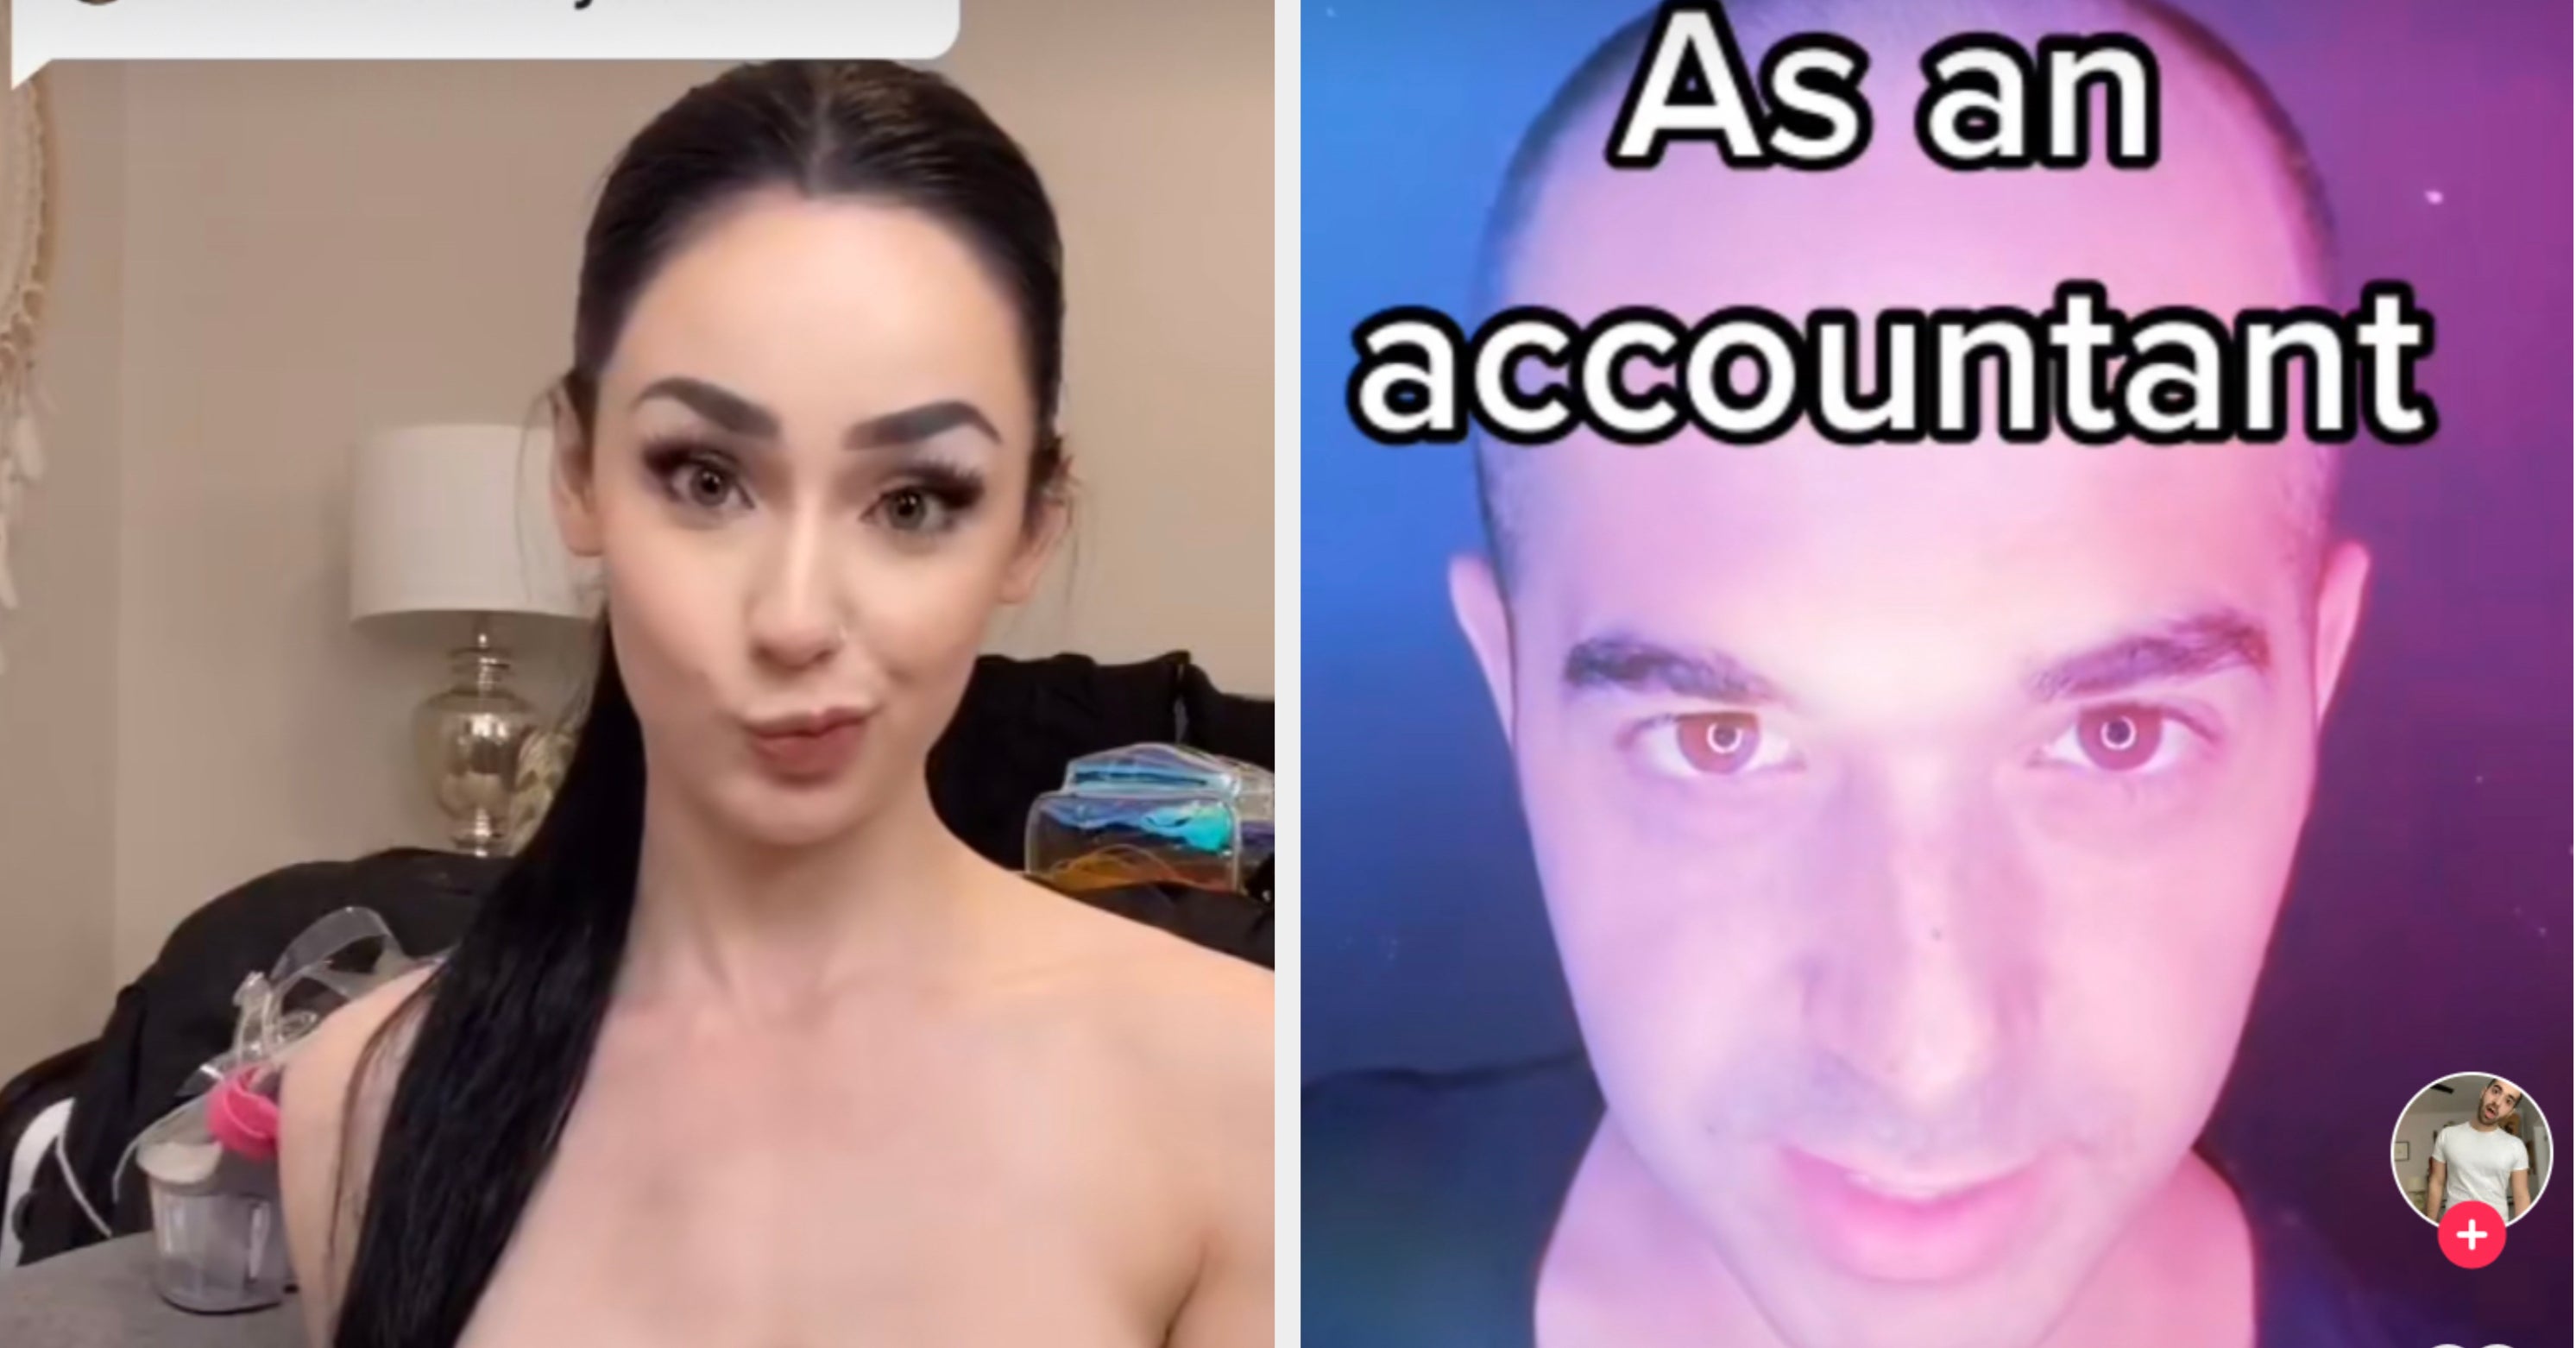 Accountant Sex - This Actor's TikTok About Not Being Able To Explain His Job Has Been  Embraced By Sex Workers